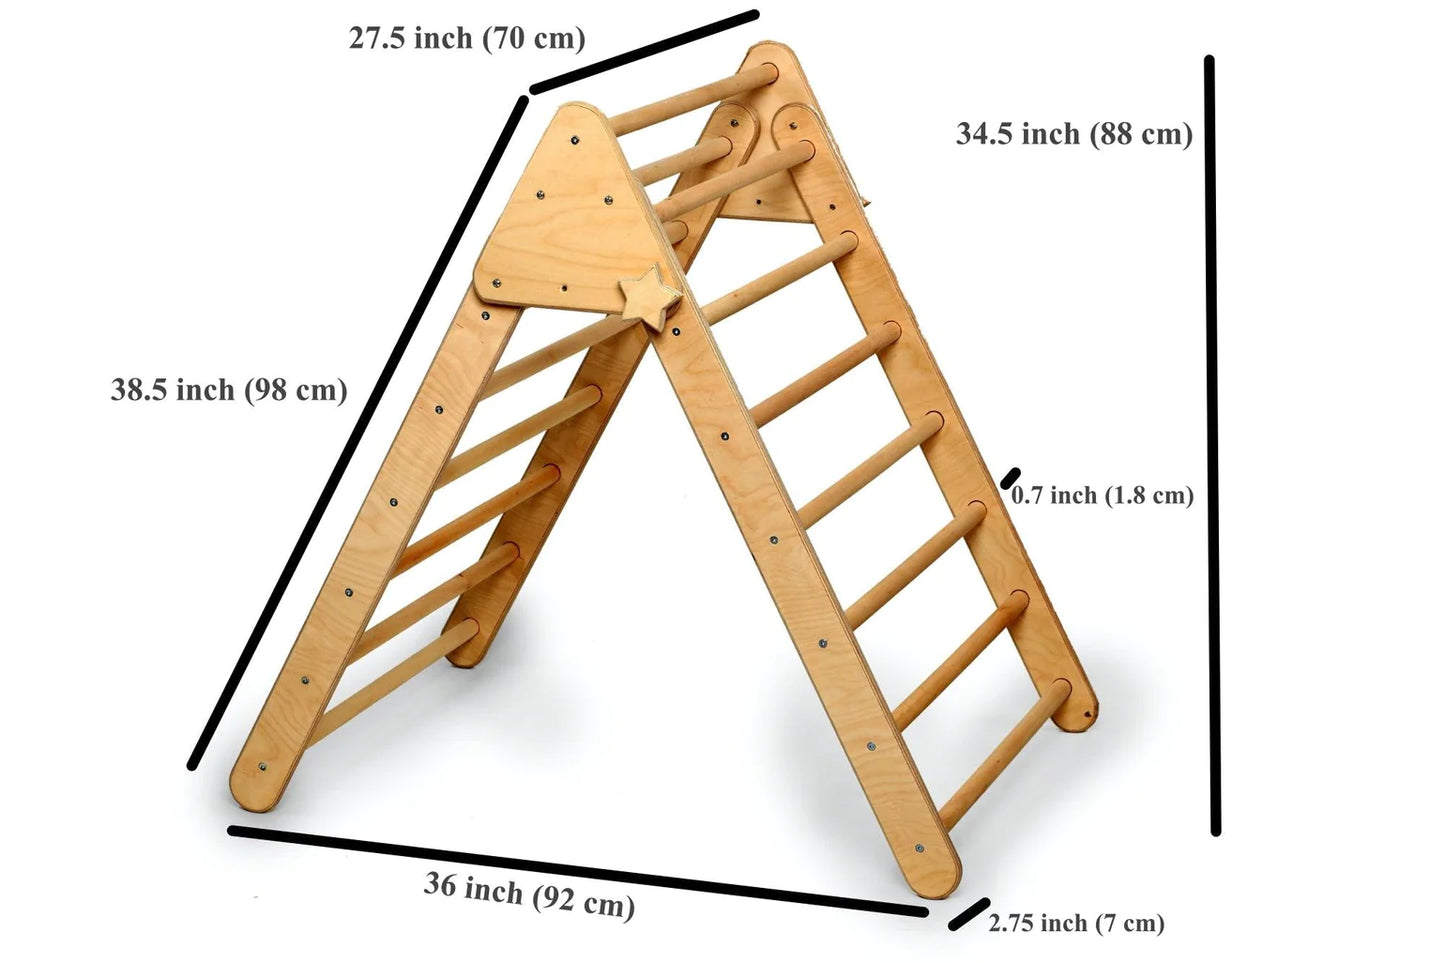 Foldable Pikler Triangle (34.5" height)